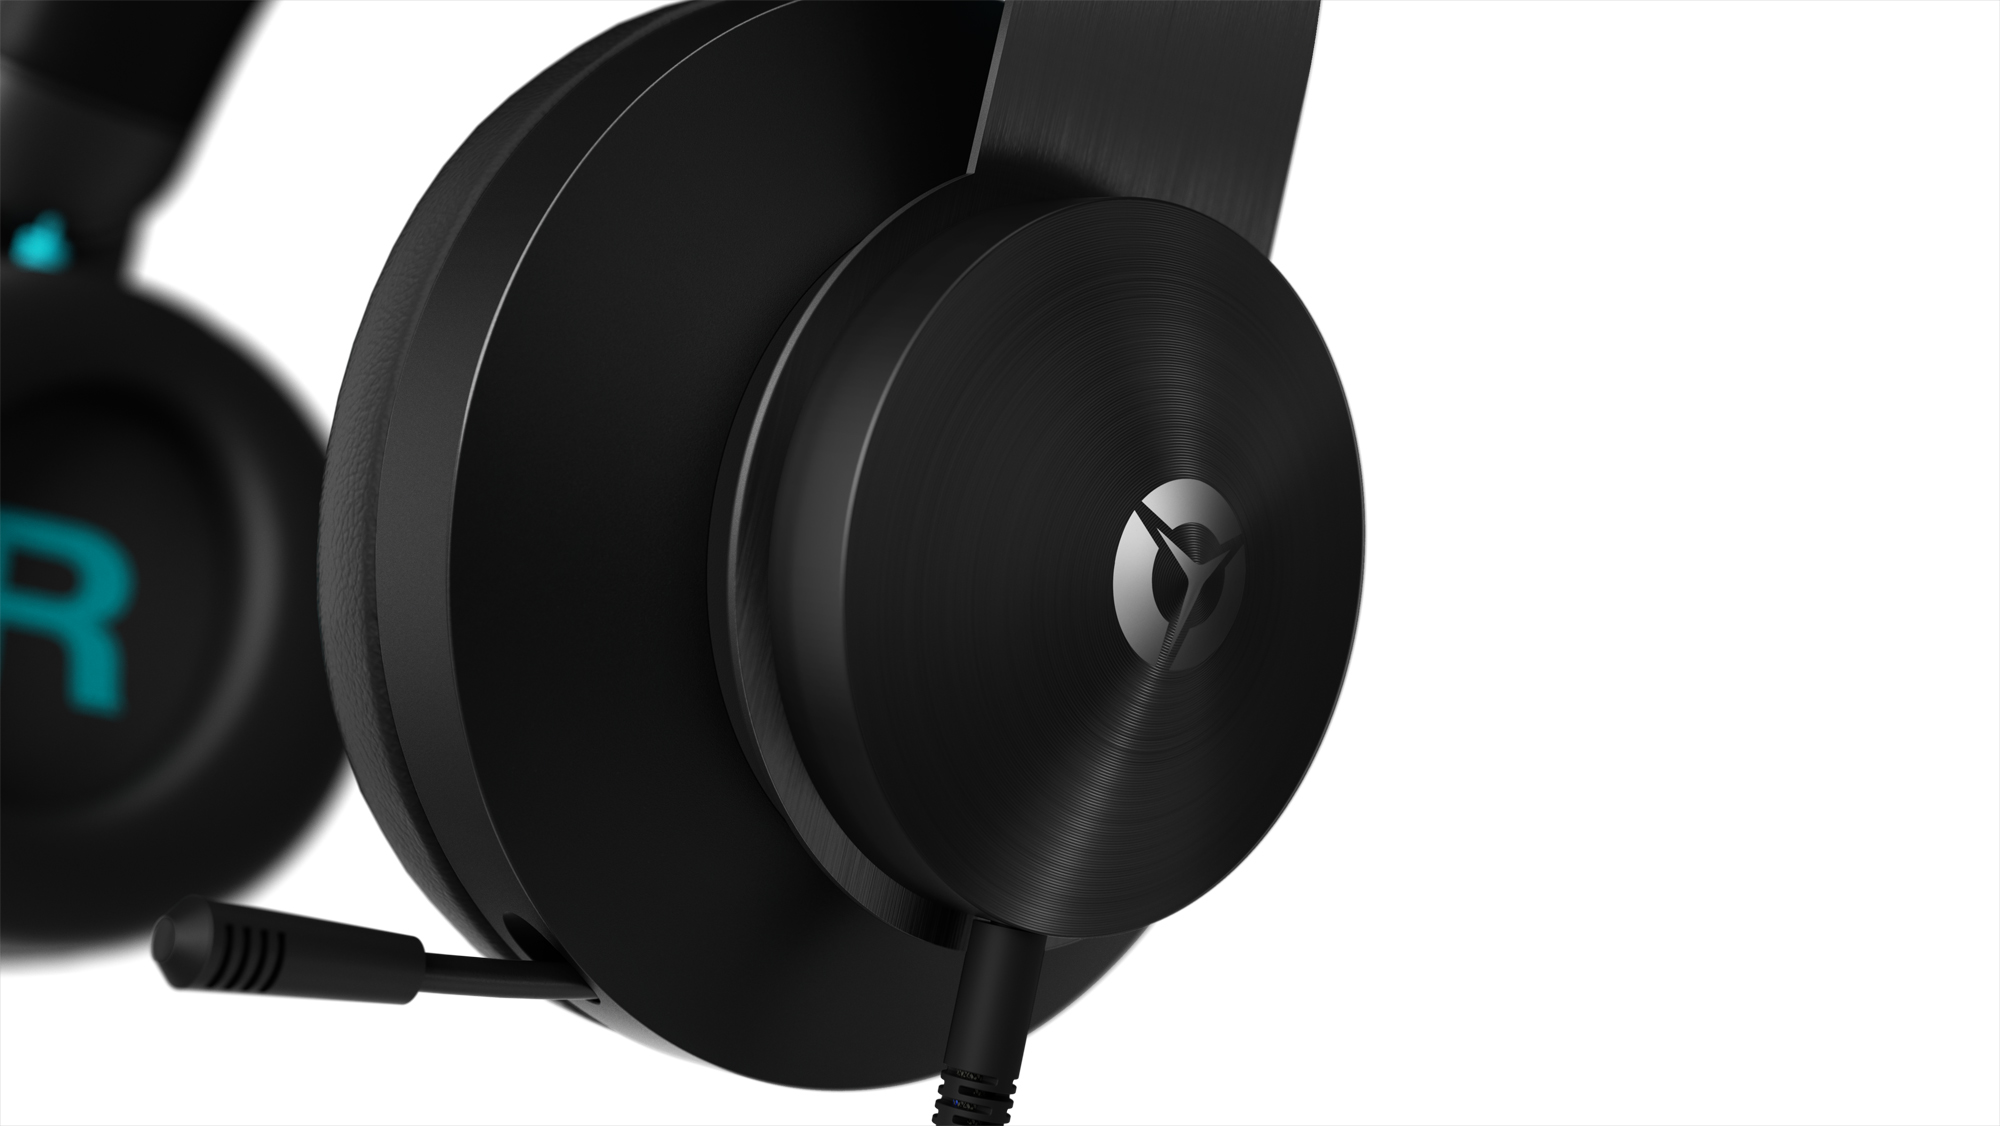 lenovo announce new legion gaming peripherals ces 2019 07 h300 hero left earcup